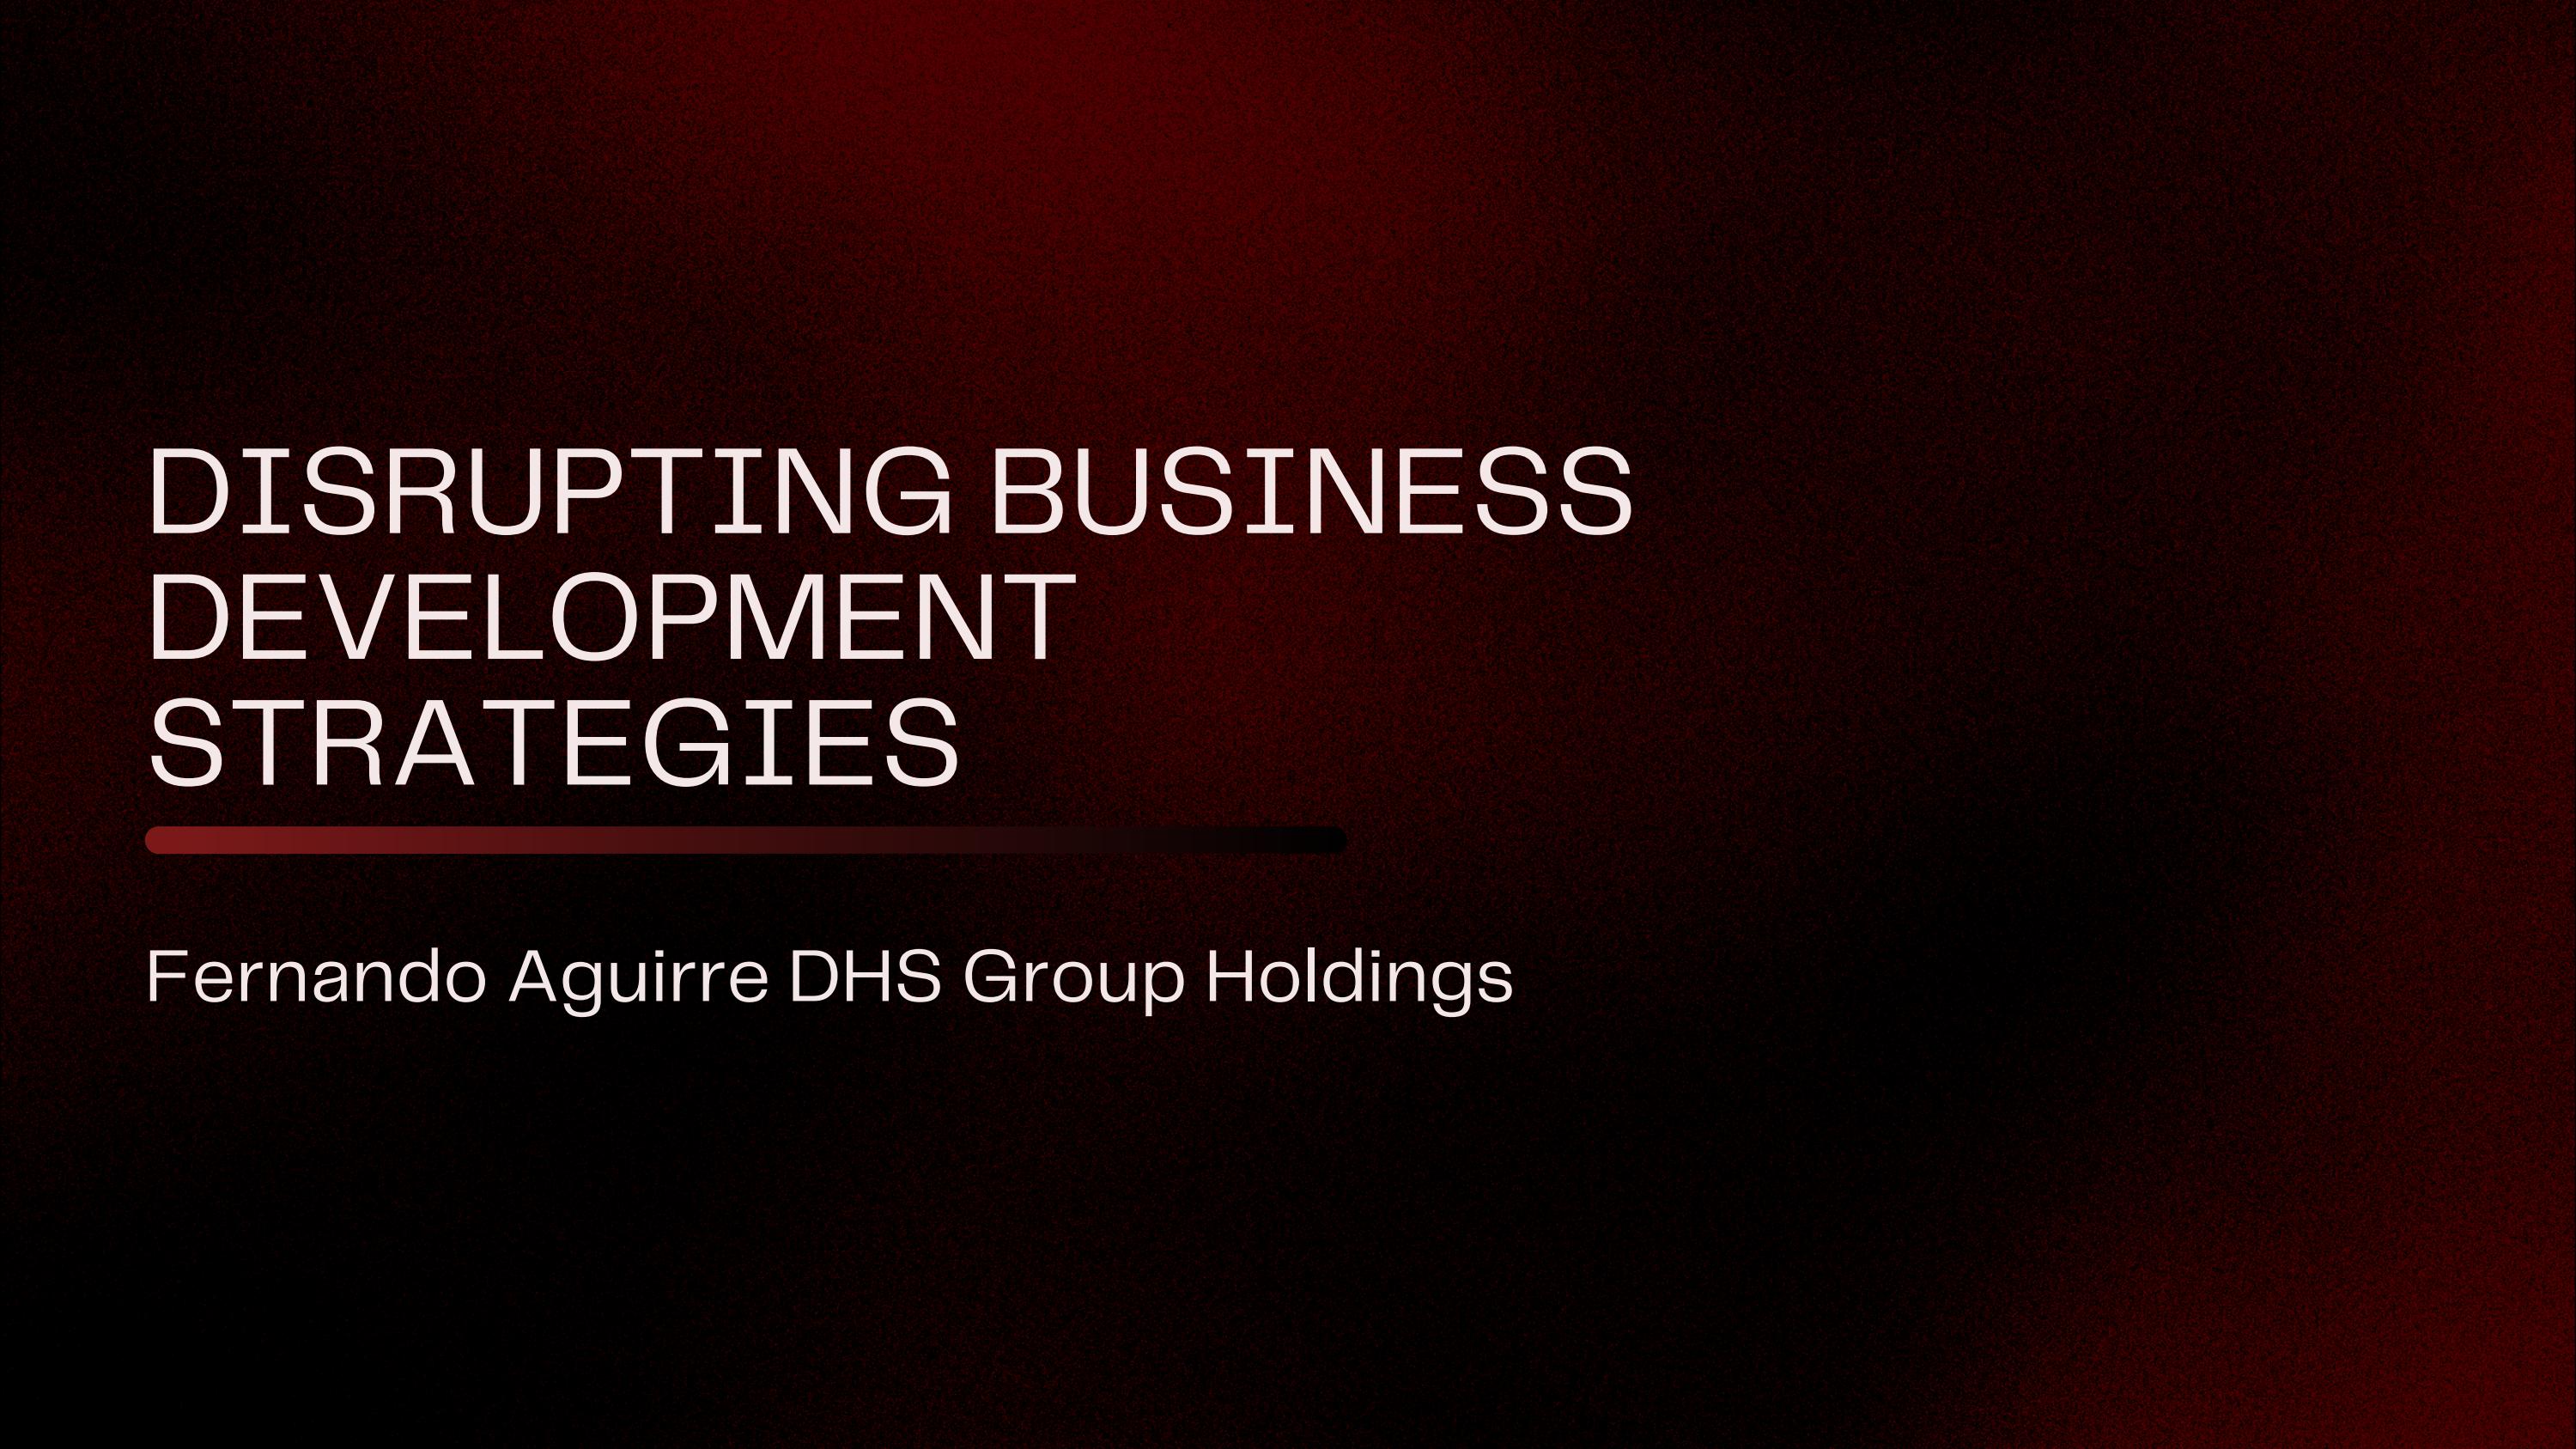 DHS Group Holdings Business Development Roadmap: Fernando Aguirre DHS Group Holdings